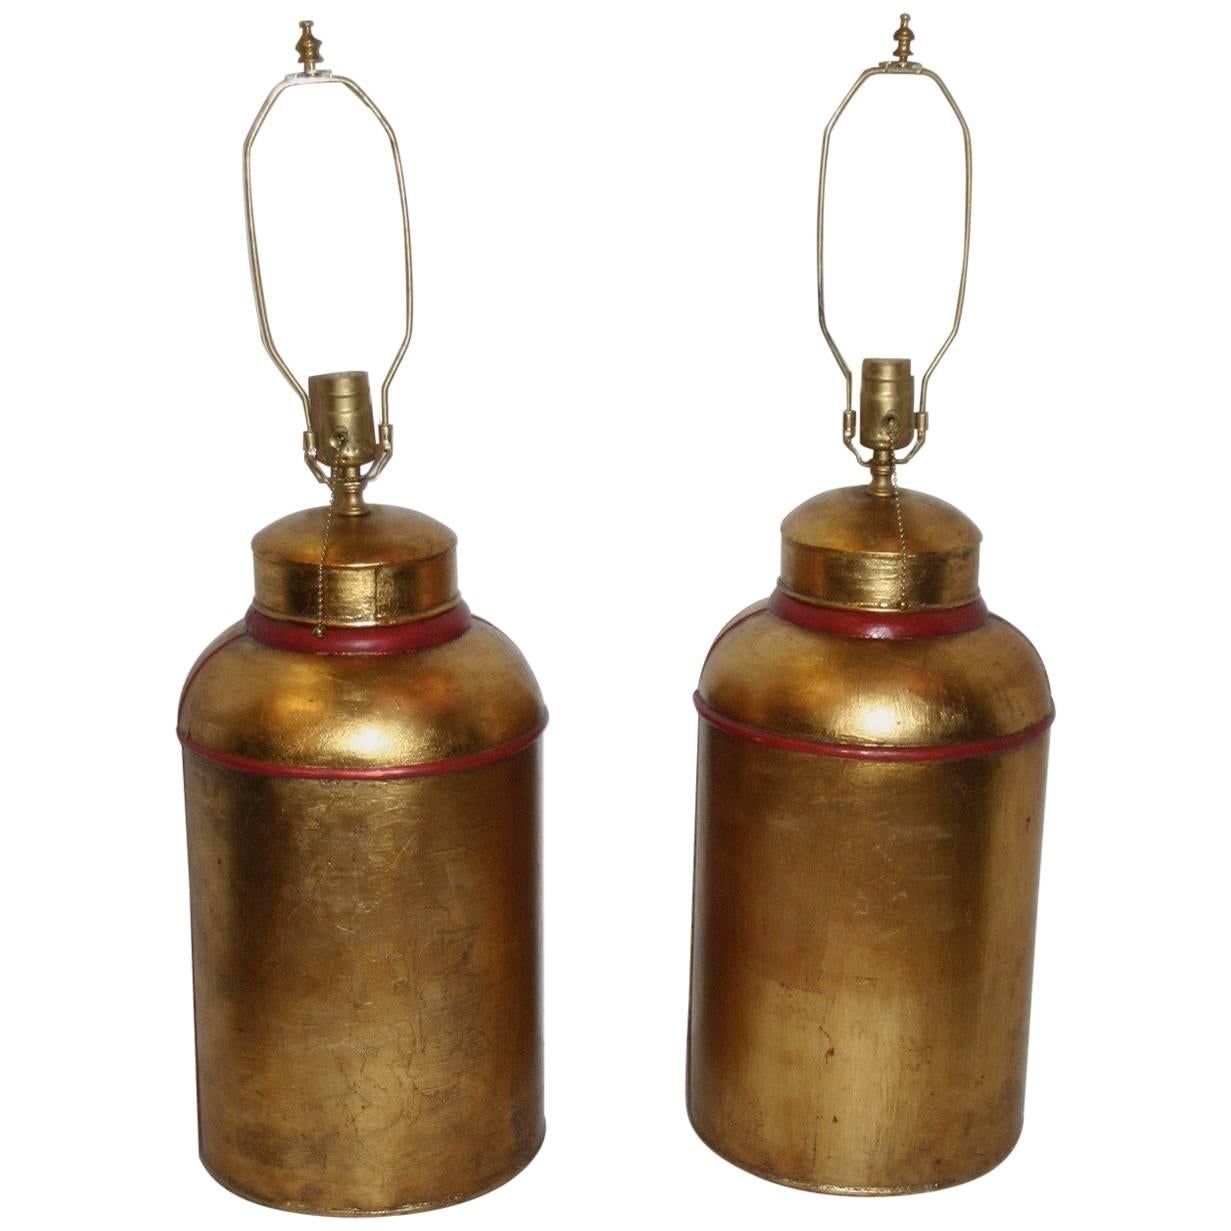 A pair of circa 1940s English tea canister mounted as lamps, original patina and red details.

Measurements:
Height of body 28